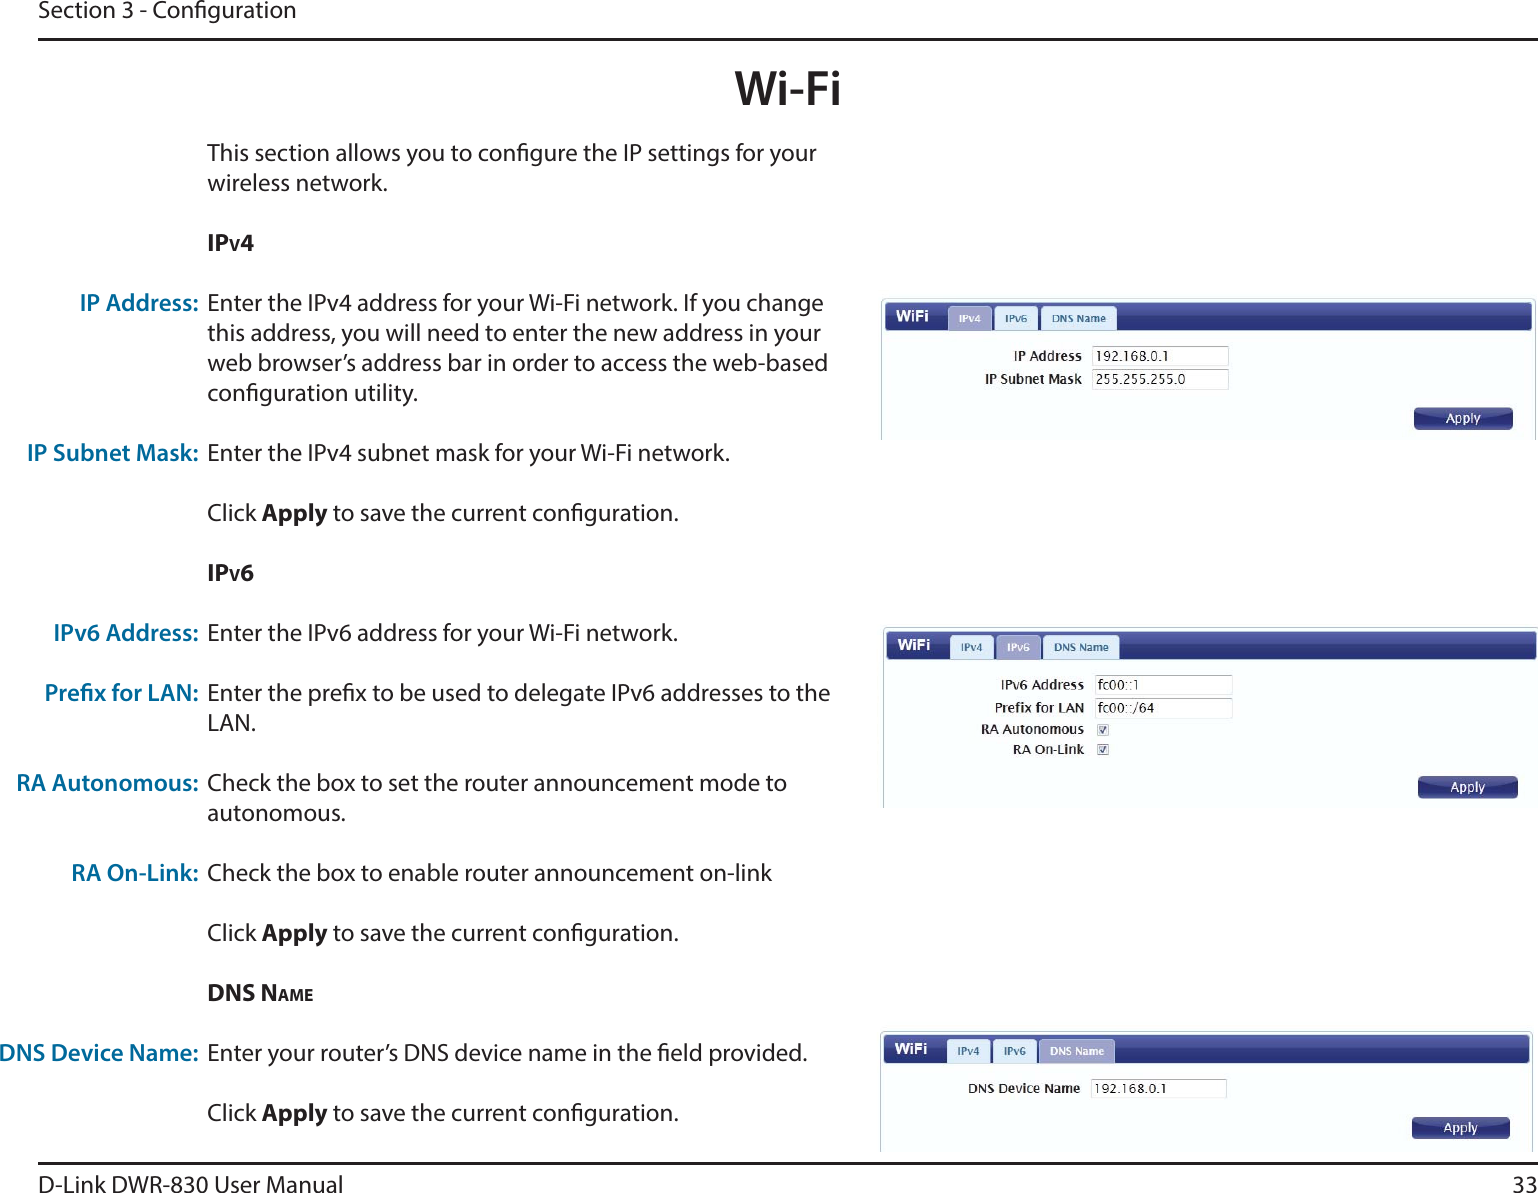 D-Link DWR-830 User Manual 33Section 3 - CongurationWi-FiThis section allows you to congure the IP settings for your wireless network.IPV4Enter the IPv4 address for your Wi-Fi network. If you change this address, you will need to enter the new address in your web browser’s address bar in order to access the web-based conguration utility. Enter the IPv4 subnet mask for your Wi-Fi network. Click Apply to save the current conguration. IPV6Enter the IPv6 address for your Wi-Fi network.Enter the prex to be used to delegate IPv6 addresses to the LAN.Check the box to set the router announcement mode to autonomous.Check the box to enable router announcement on-linkClick Apply to save the current conguration. DNS NAMEEnter your router’s DNS device name in the eld provided. Click Apply to save the current conguration. IP Address:IP Subnet Mask:IPv6 Address:Prex for LAN:RA Autonomous:RA On-Link:DNS Device Name: